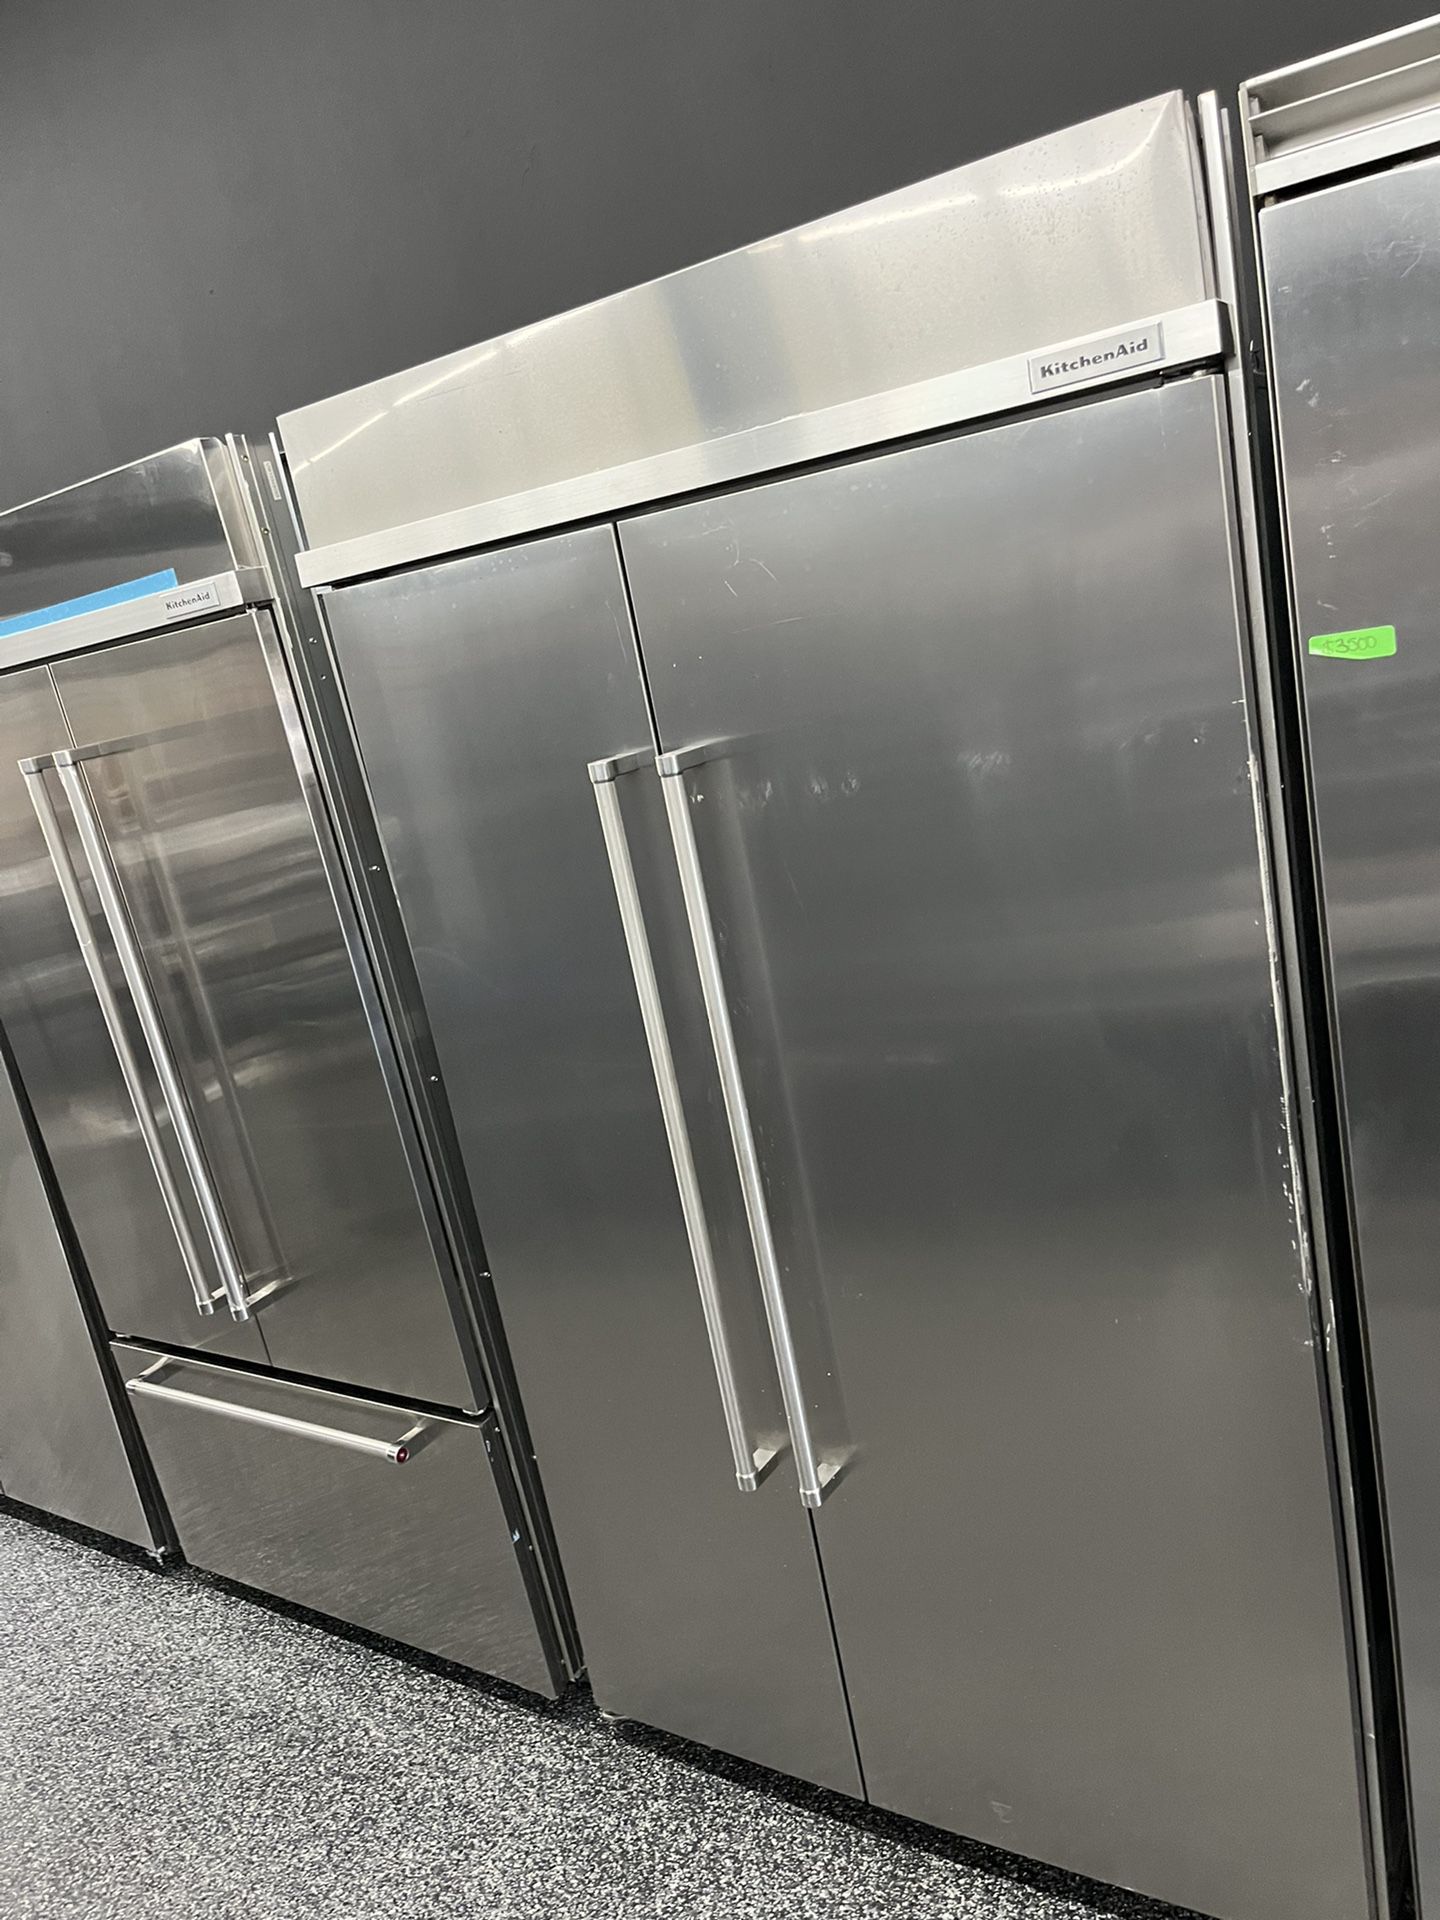 Kitchen Aid Stainless Steel Built In 48” Side By Side Fridge